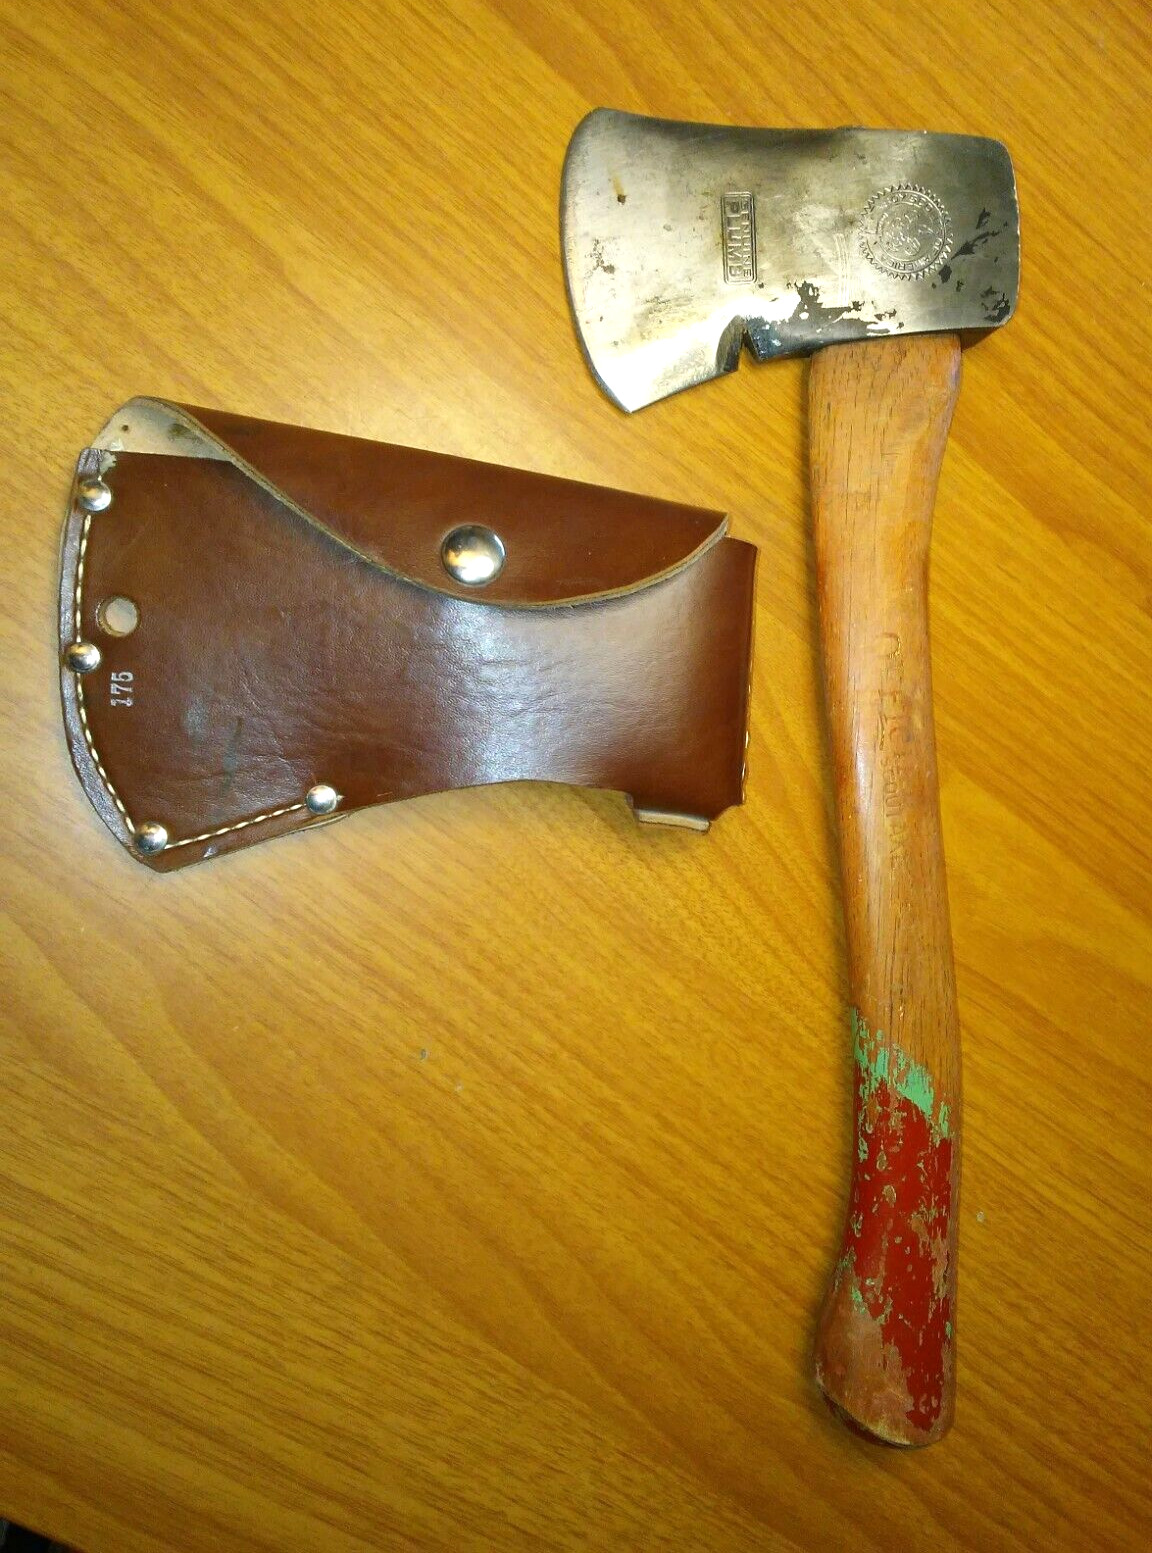 BSA Official Boy Scout Axe Hatchet 14-inch Hickory Handle Vintage 1941 to 1950